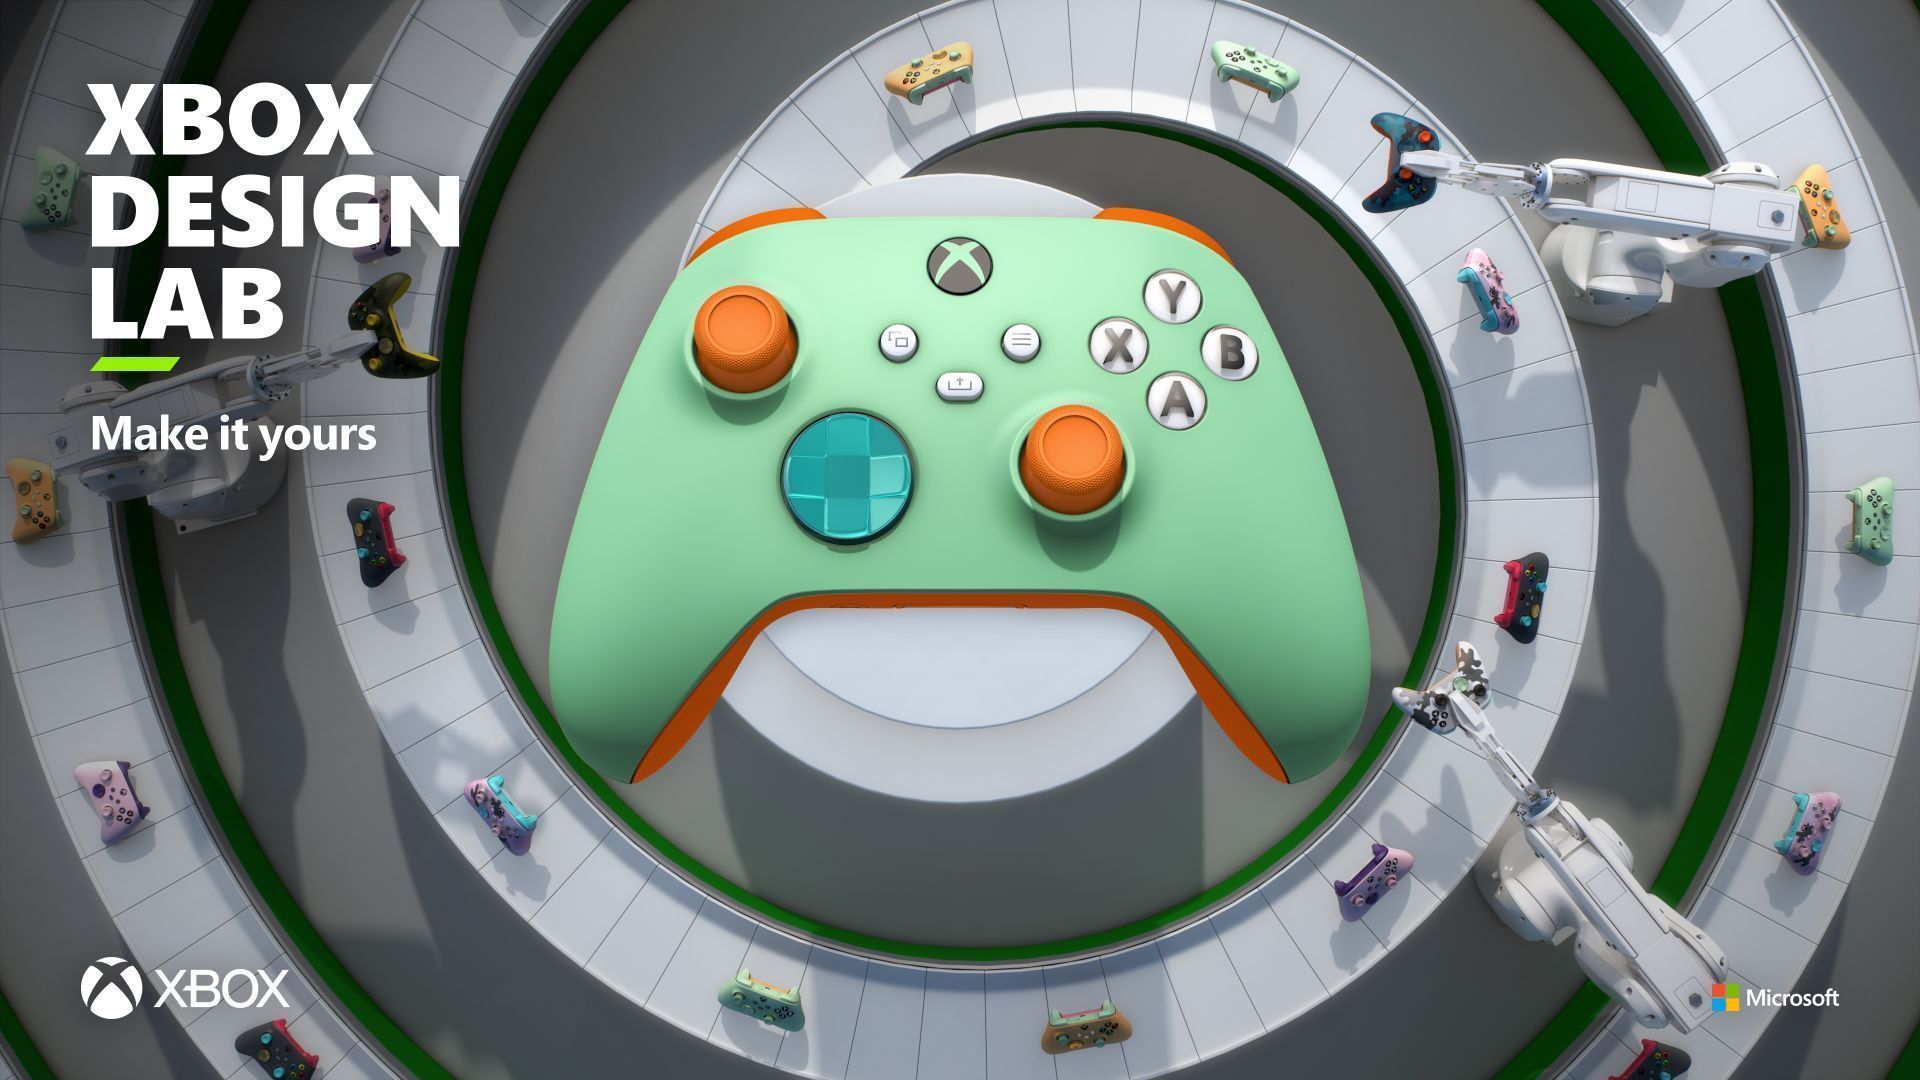 Microsoft rolling out Xbox Game Bar update with new resource